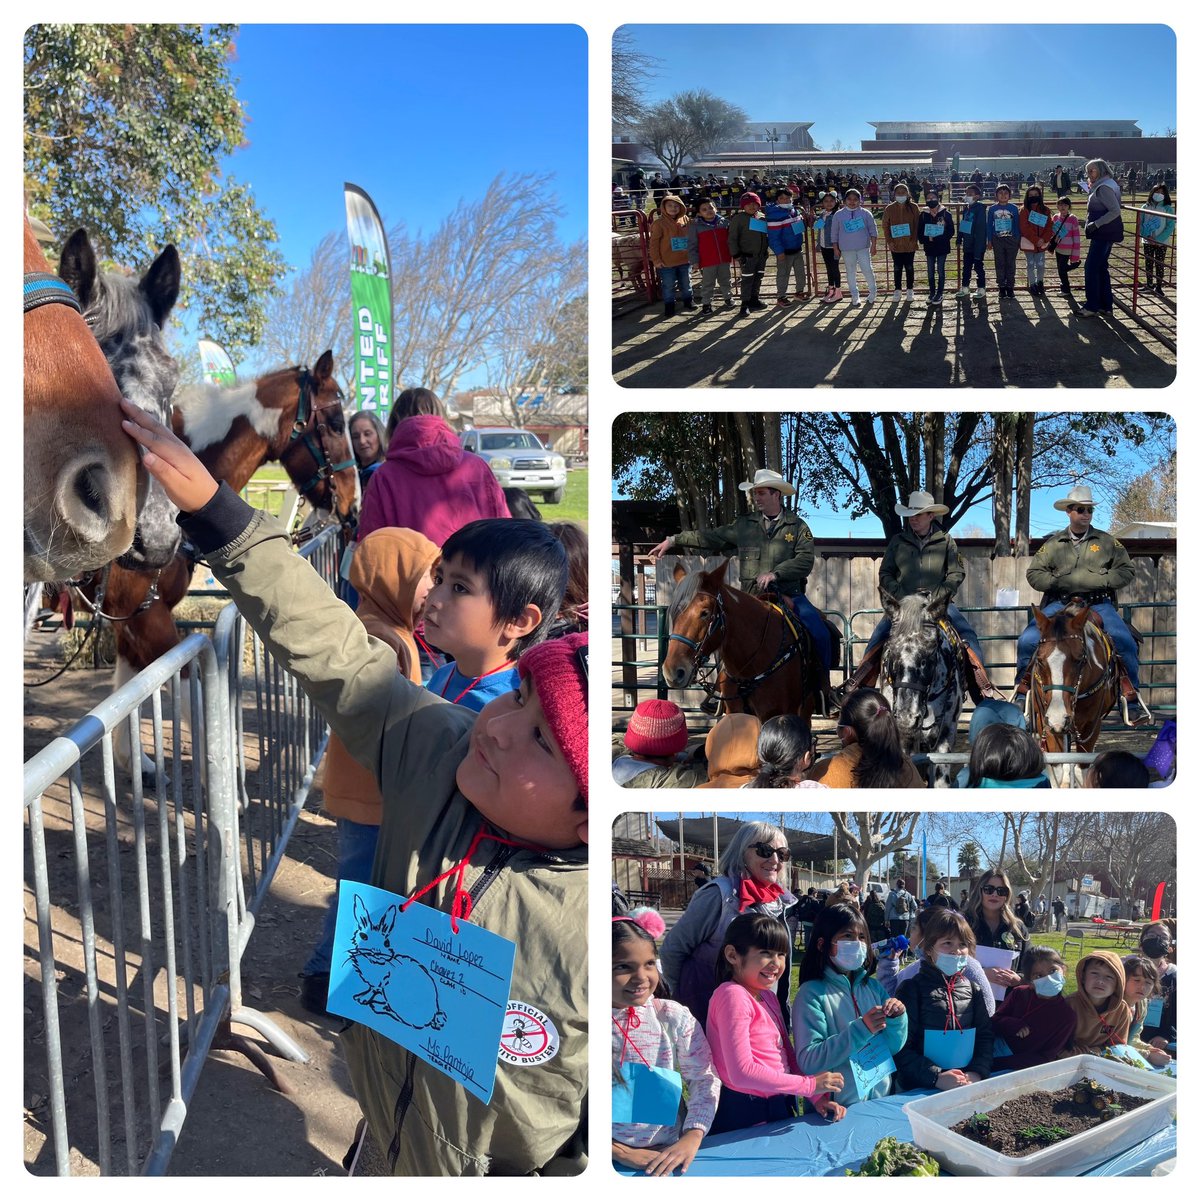 What a wonderful day for our 3rd graders! They thoroughly enjoyed their Farm Day field trip! #FarmDay #allmeansall #greenfieldguarantee @GUSDEdServices @mrmercado674 @zjgalvan @LCortezGUSD